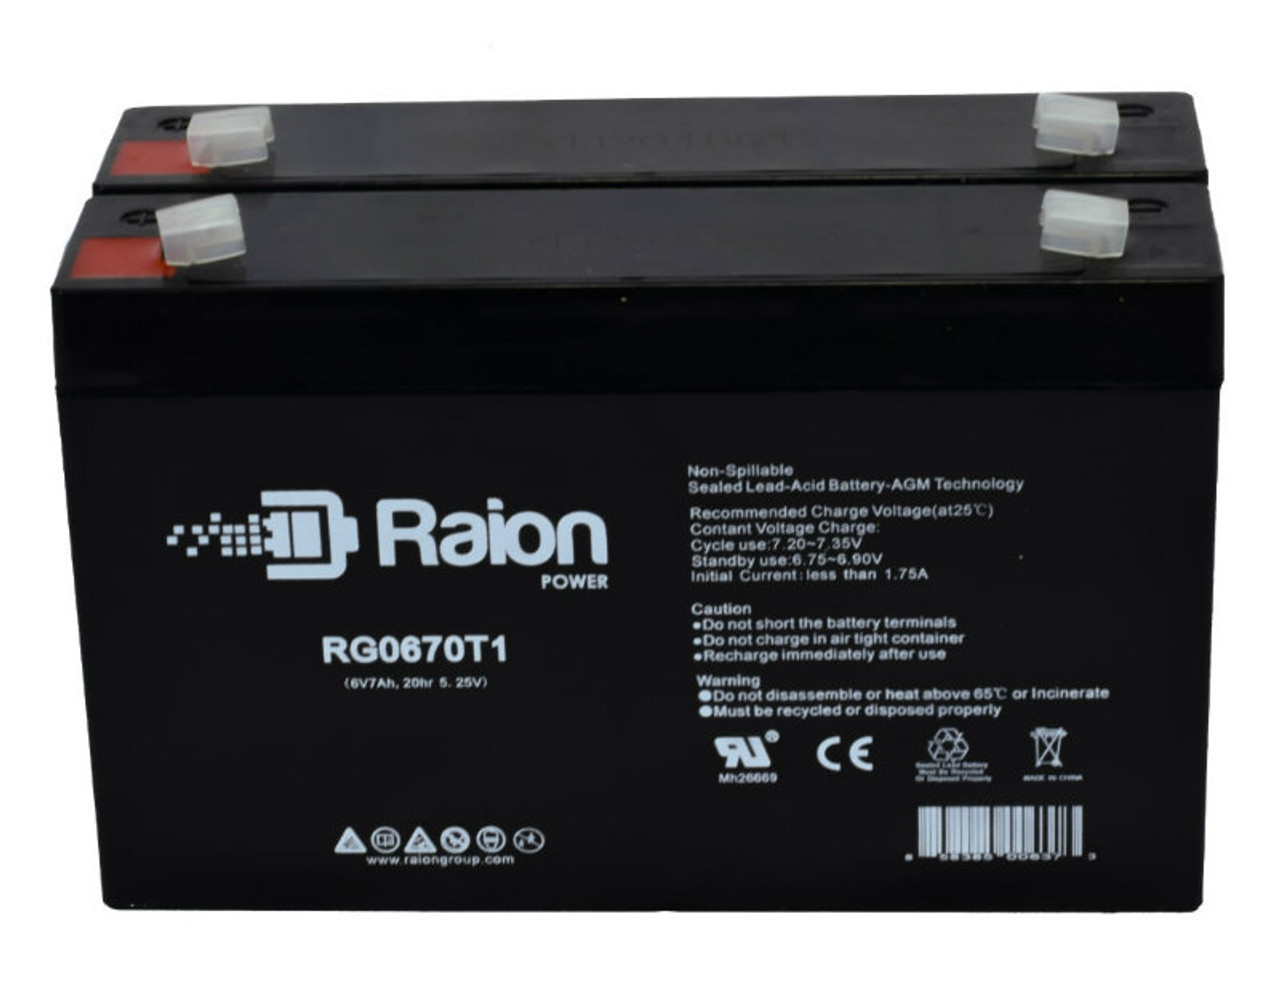 Raion Power RG0670T1 6V 7Ah Replacement Emergency Light Battery for Lithonia ESEPEL - 2 Pack